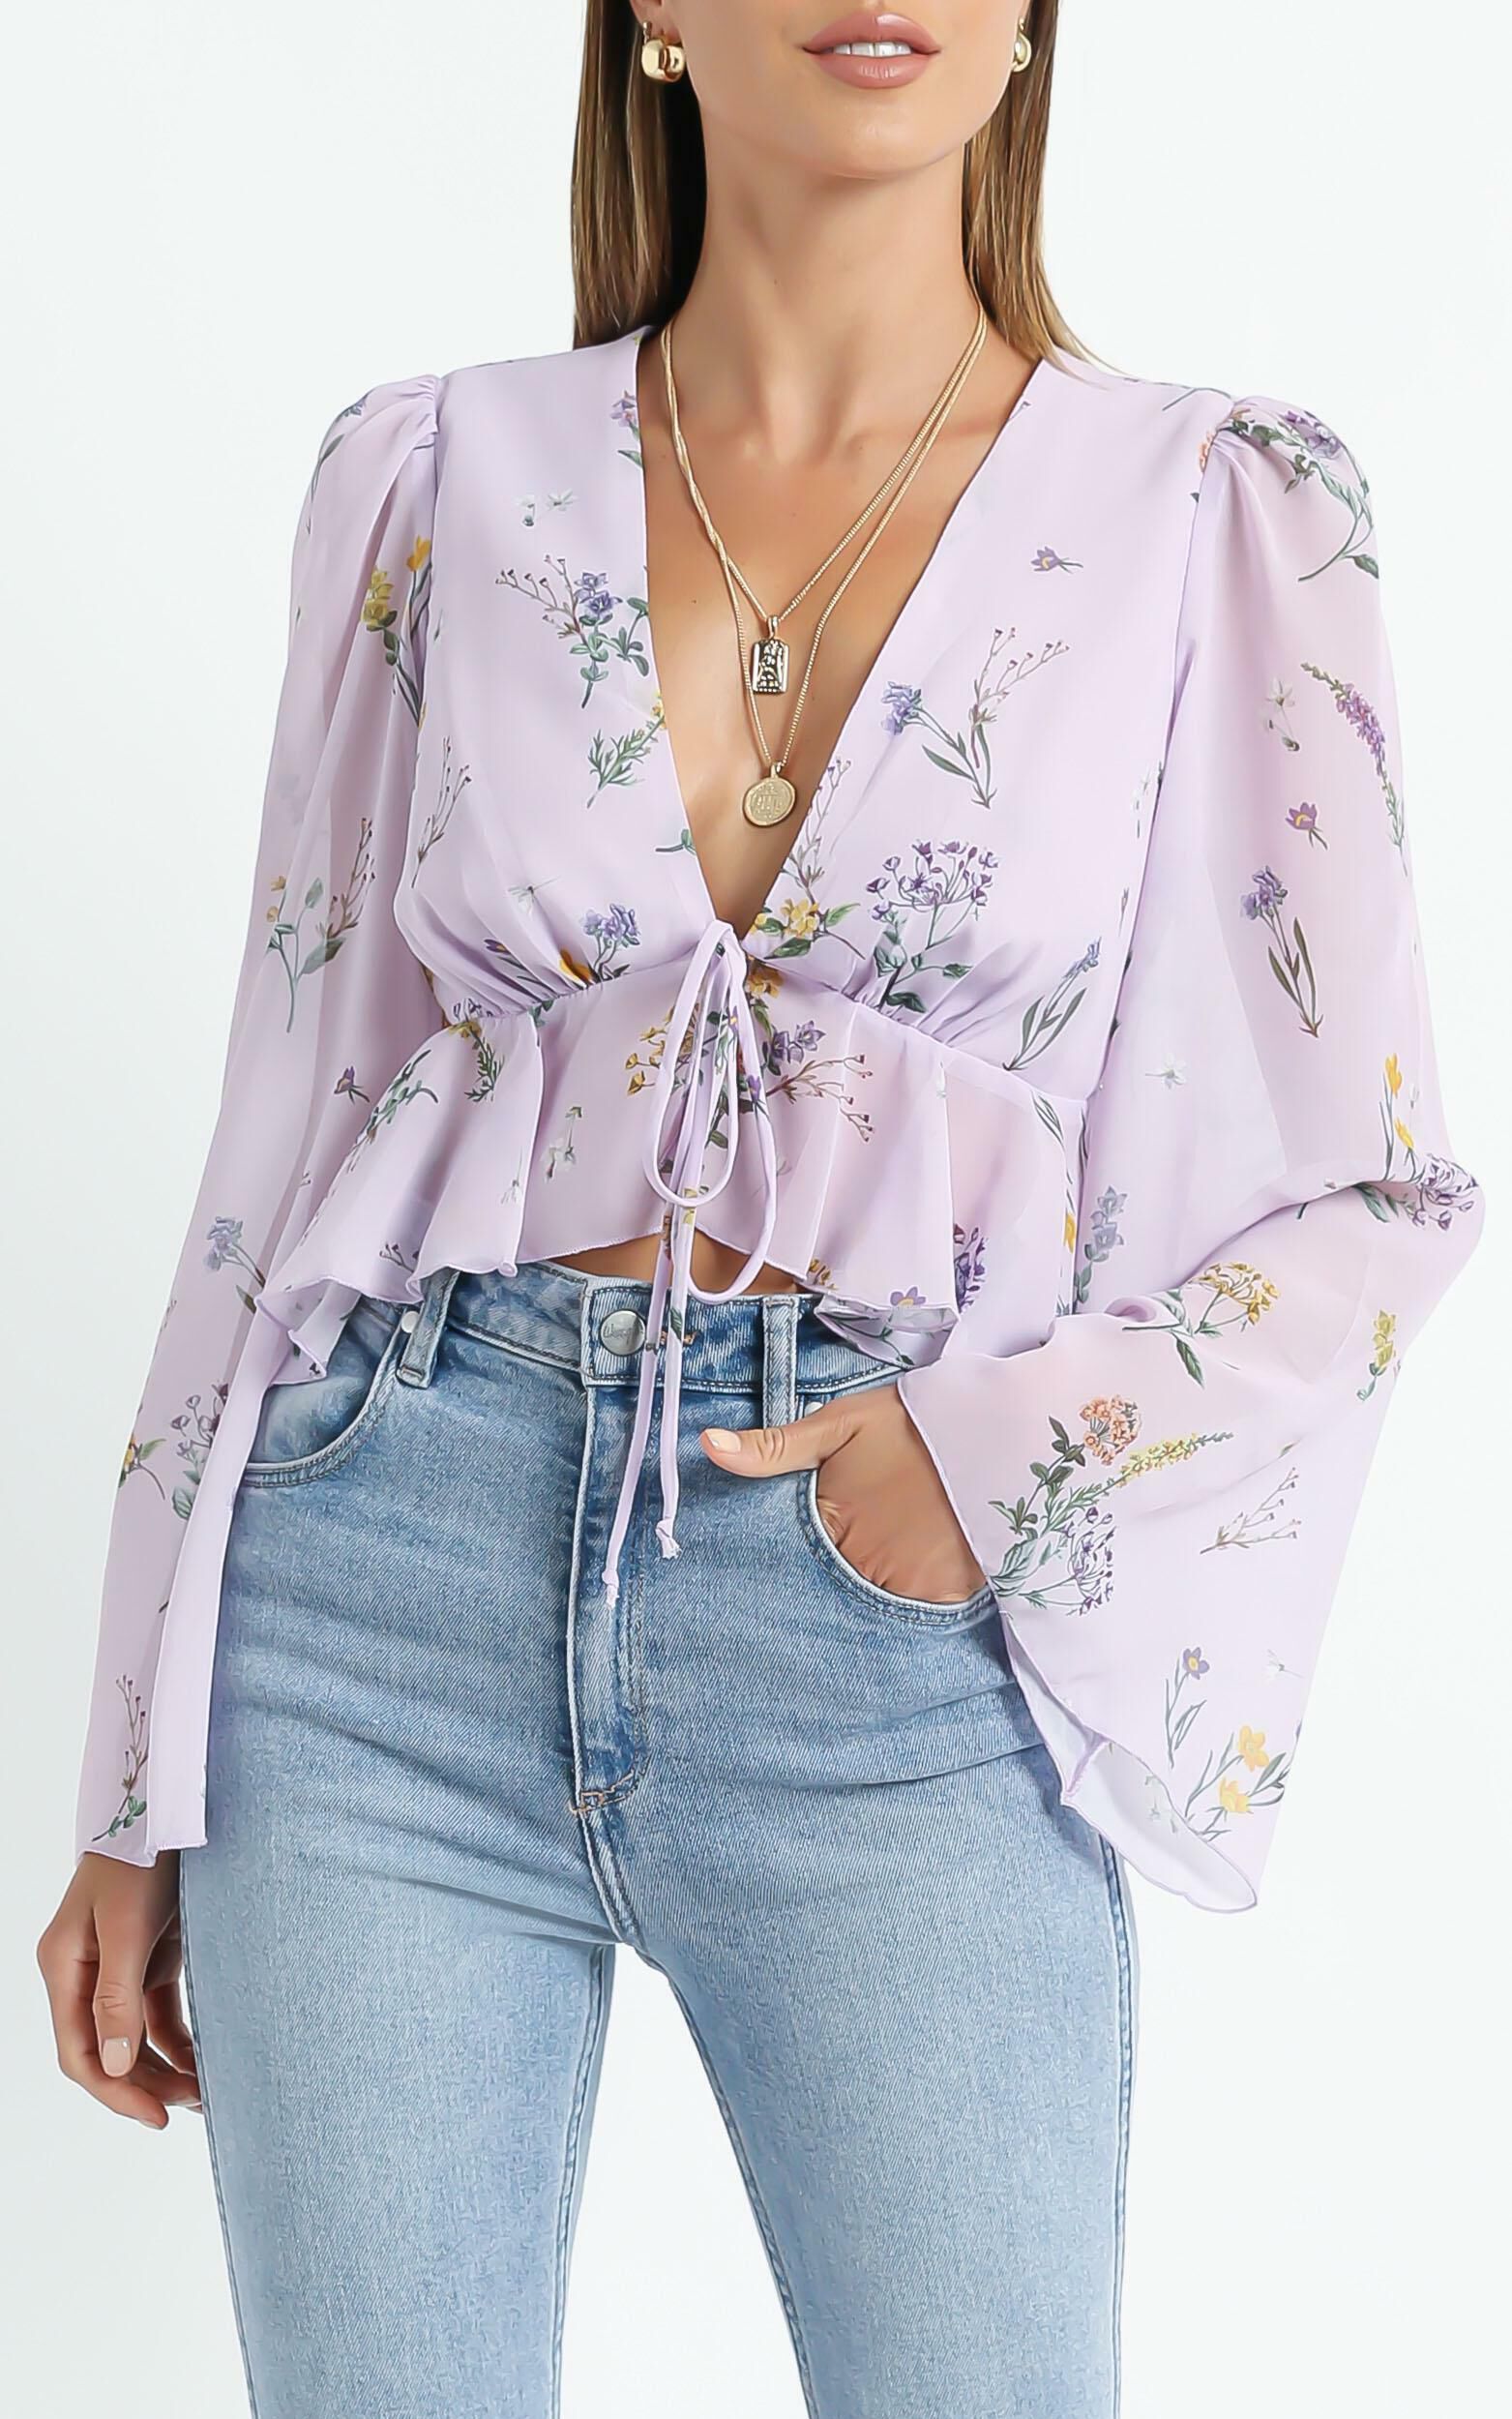 Dance It Out Top in Lavender Botanical Floral - 6 (XS), Purple